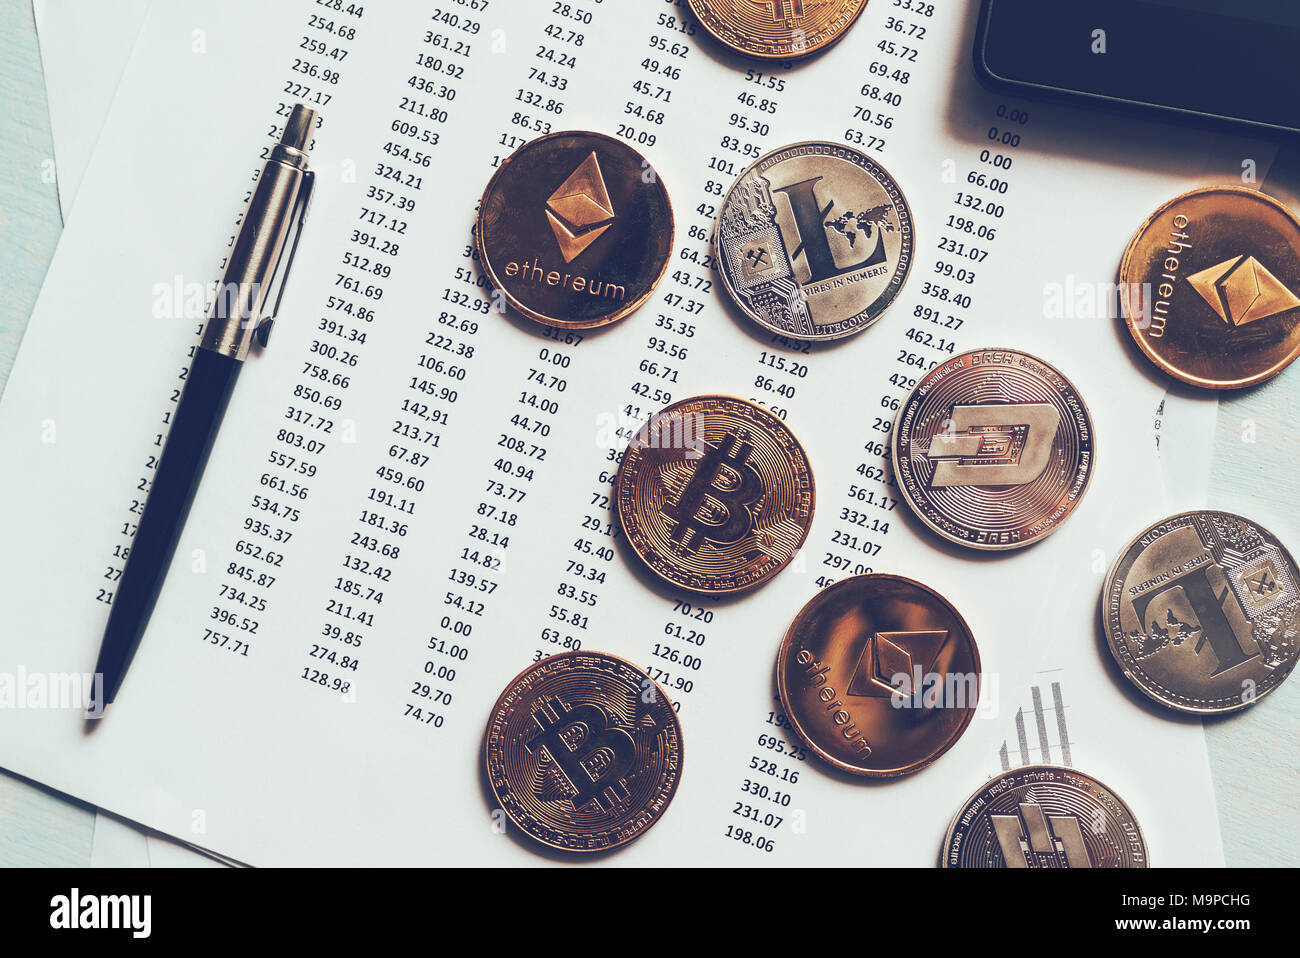 Cryptocurrency coins with exchange rate table, various crypto money on business desk Stock Photo